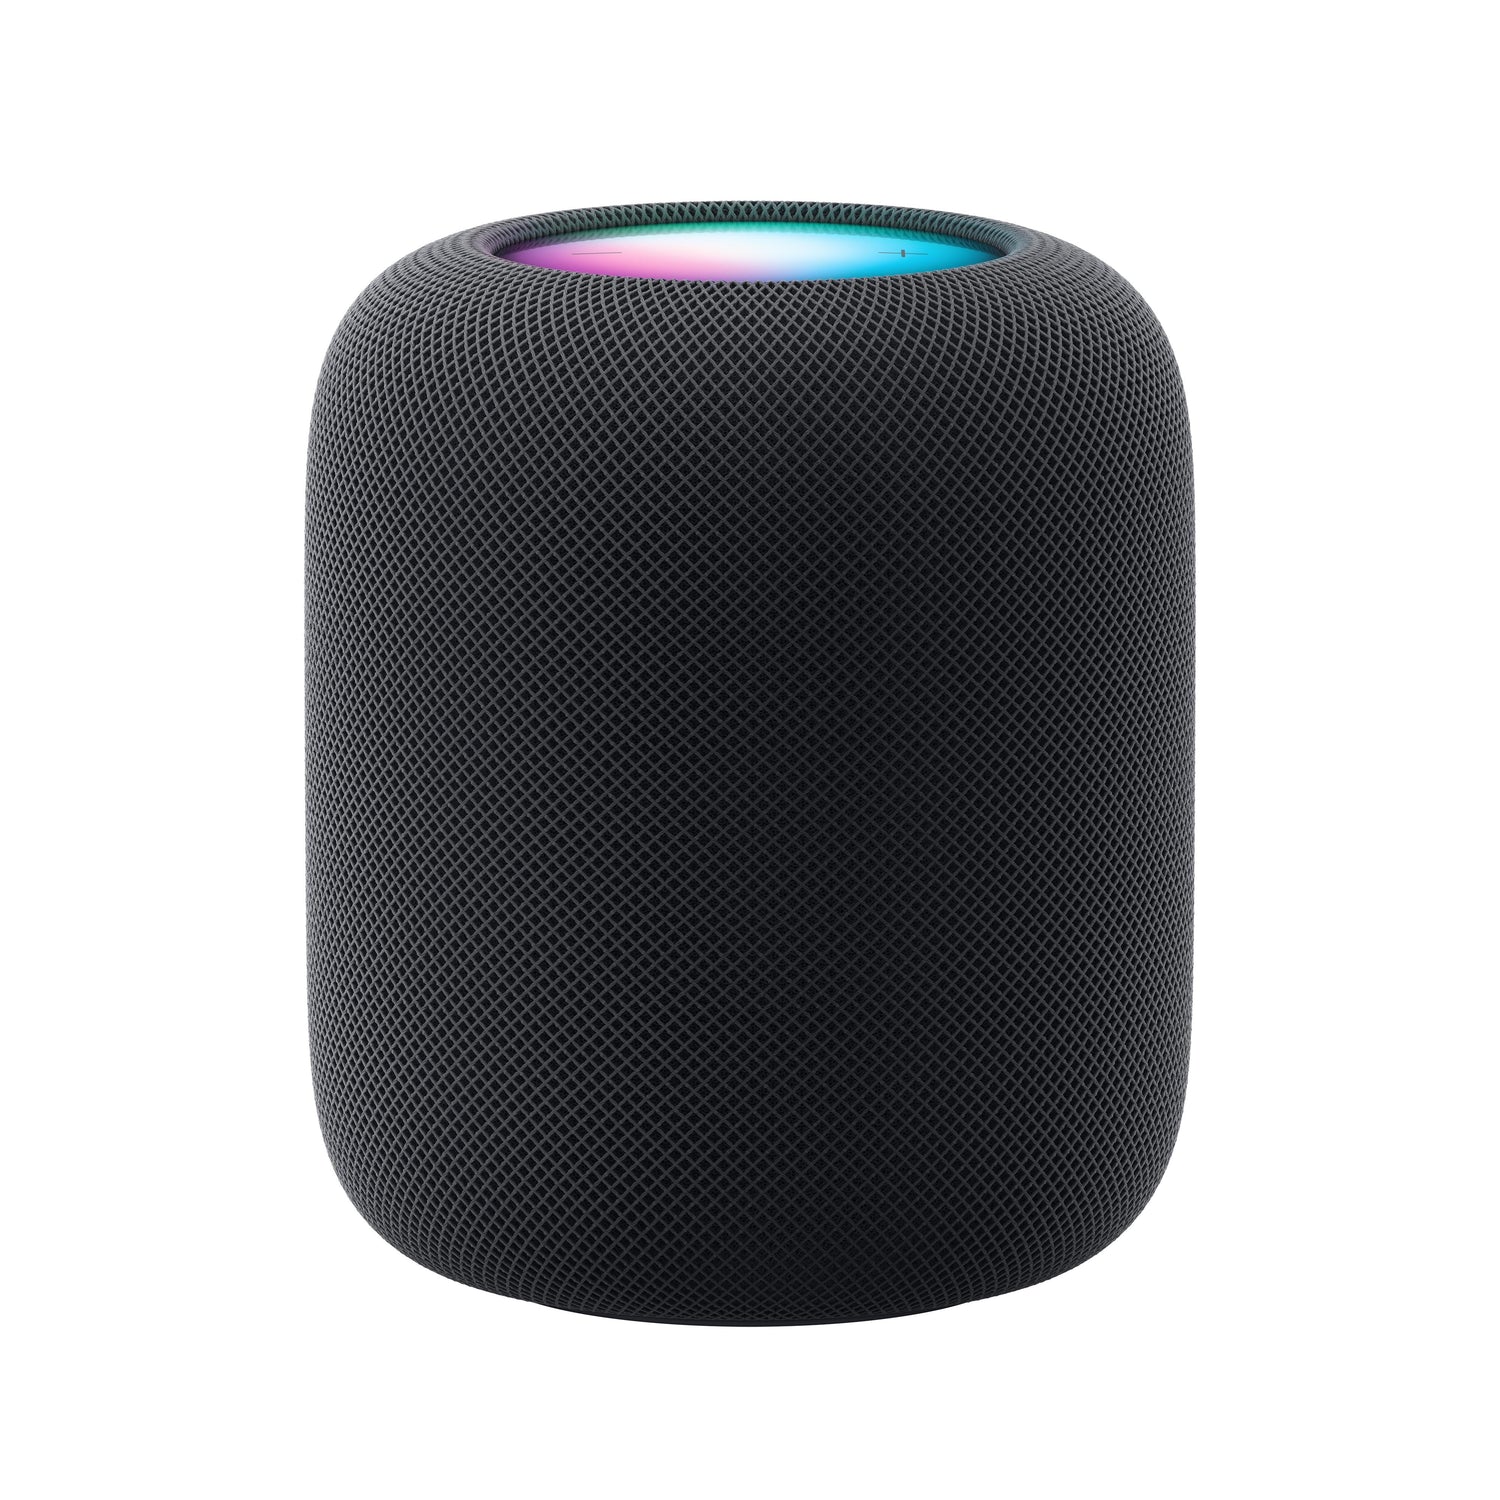 apl_ps_HomePod